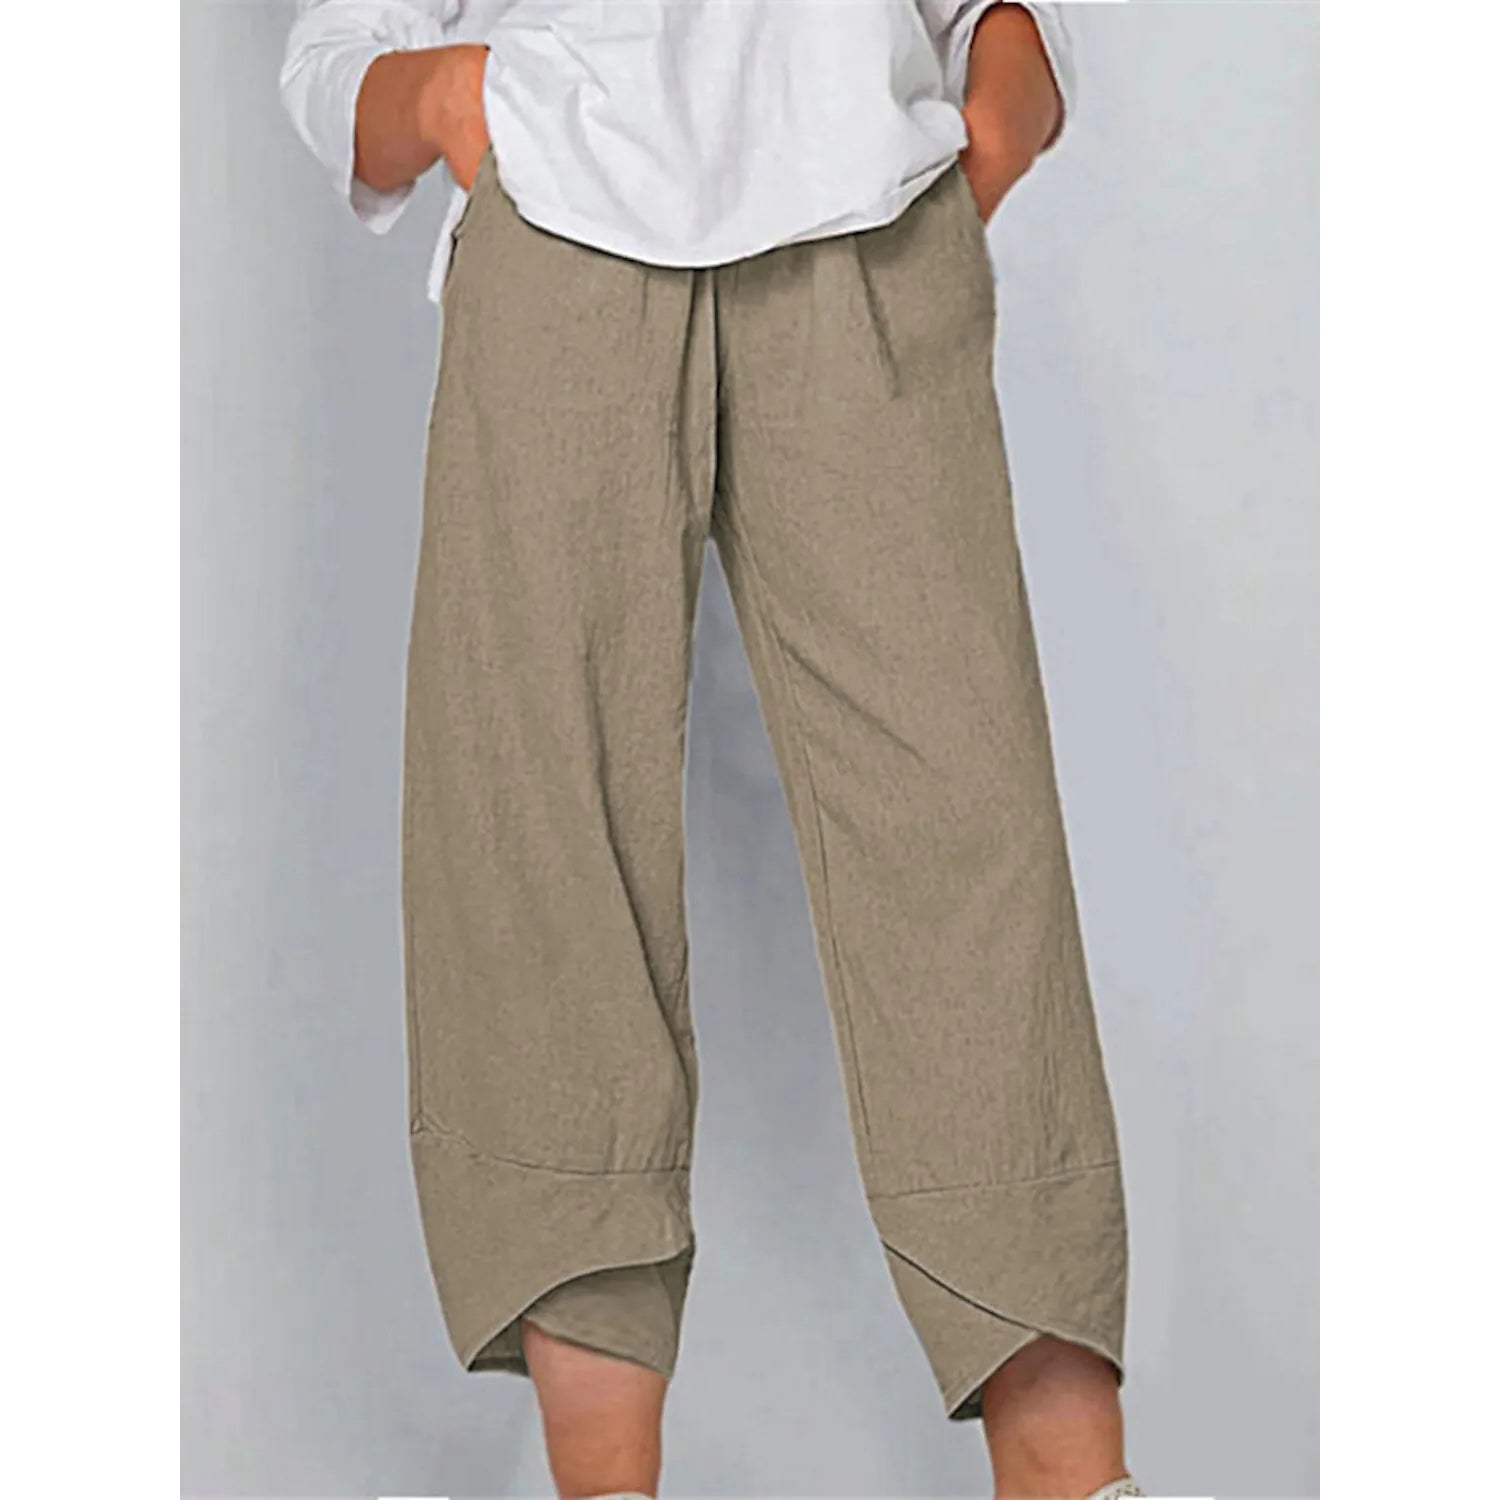 Plus Size Ladies Cotton Linen Casual Long Pants Womens Solid Cropped  Trousers US | eBay